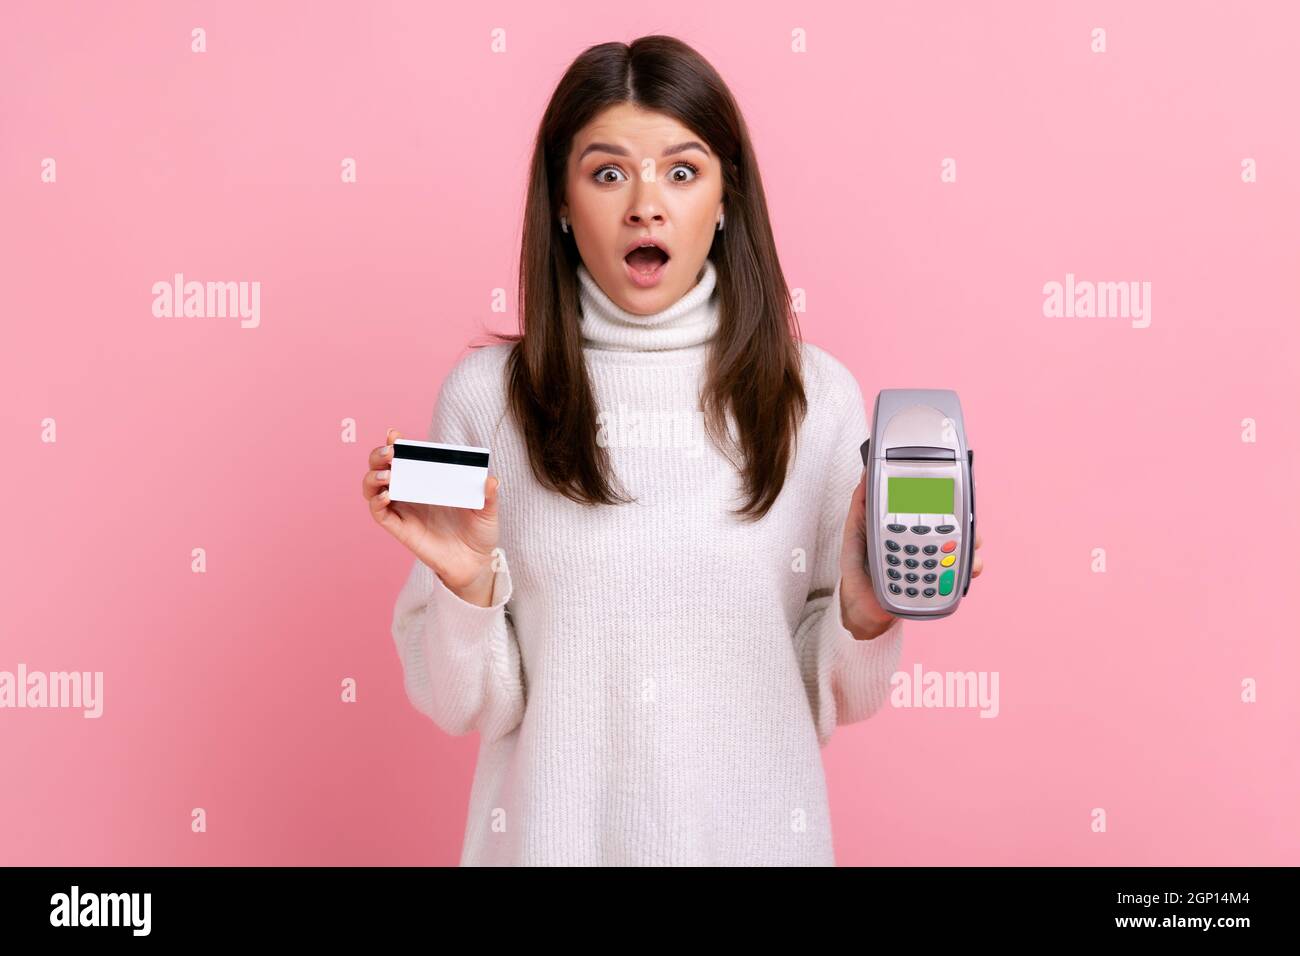 Astonished woman showing pos payment terminal and credit or debit card, using cashless payments, nfc, wearing white casual style sweater. Indoor studio shot isolated on pink background. Stock Photo